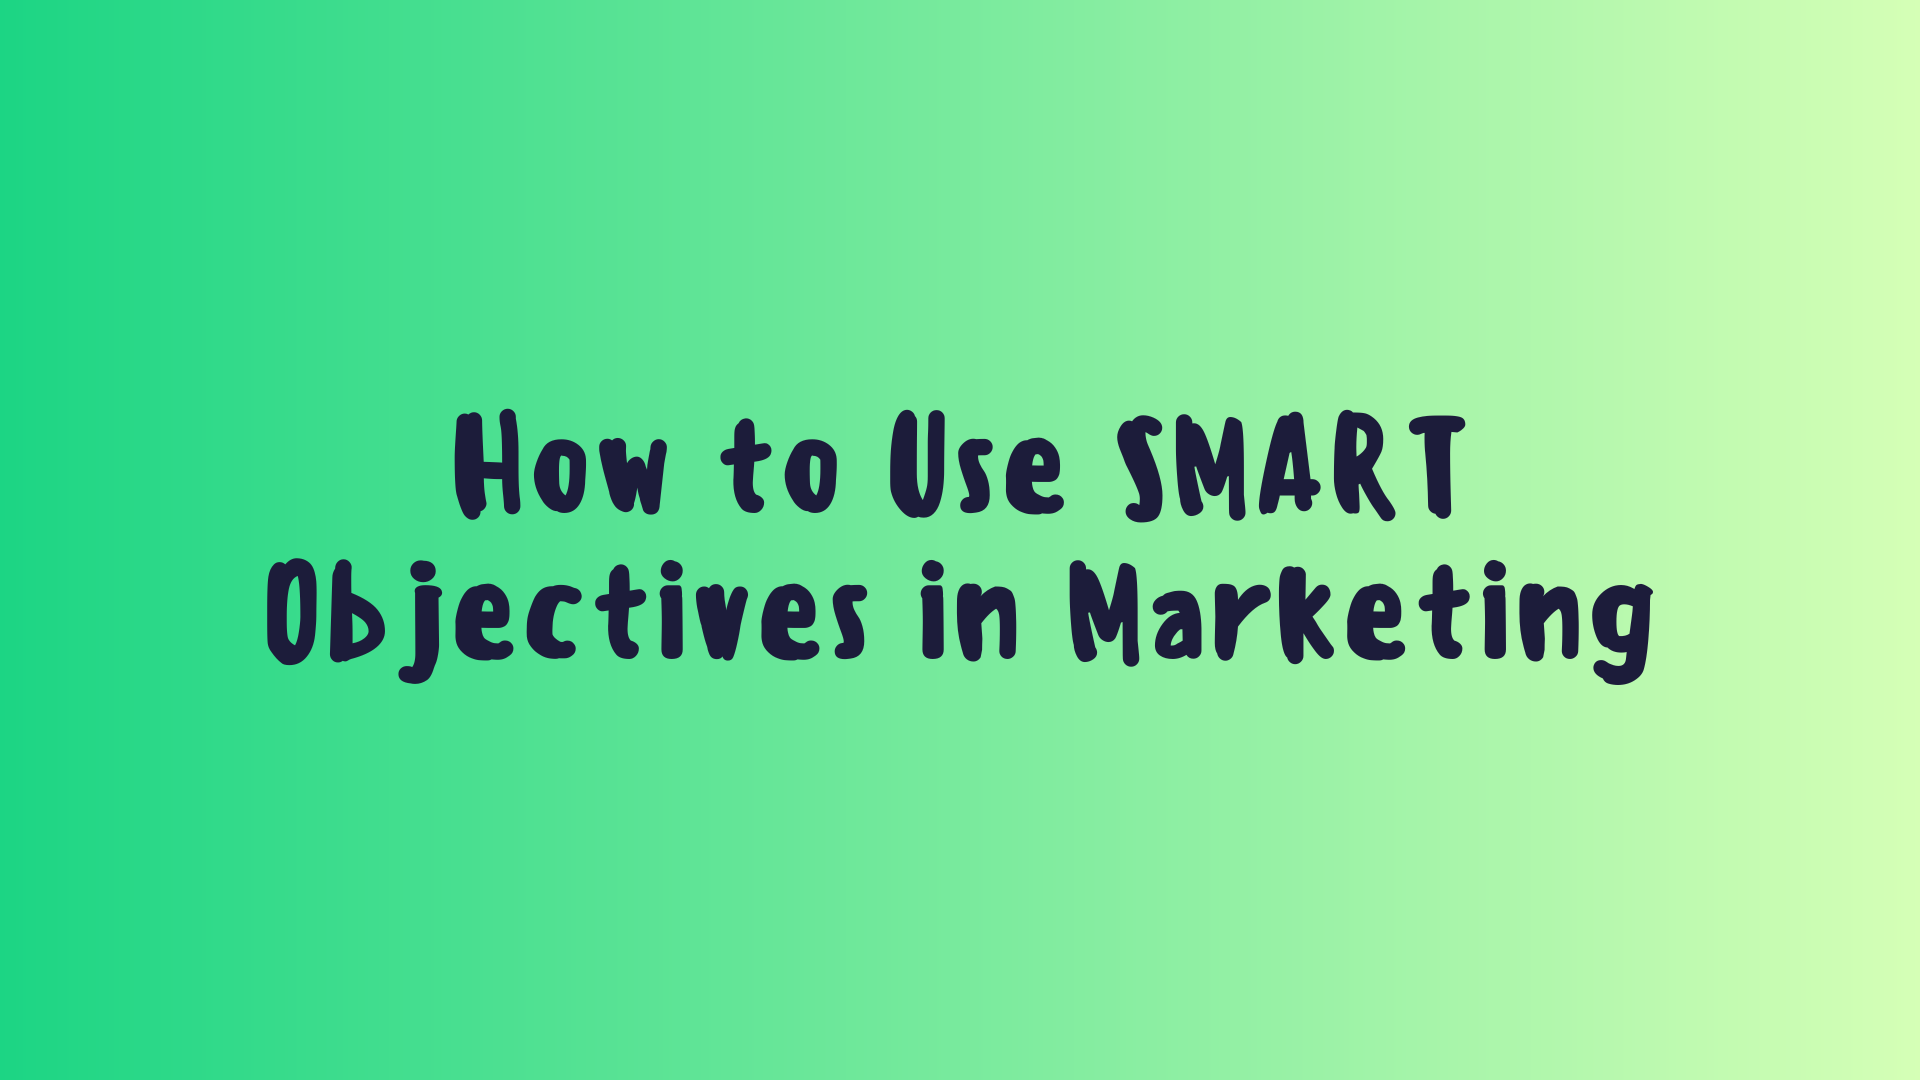 How to Use SMART Objectives in Marketing